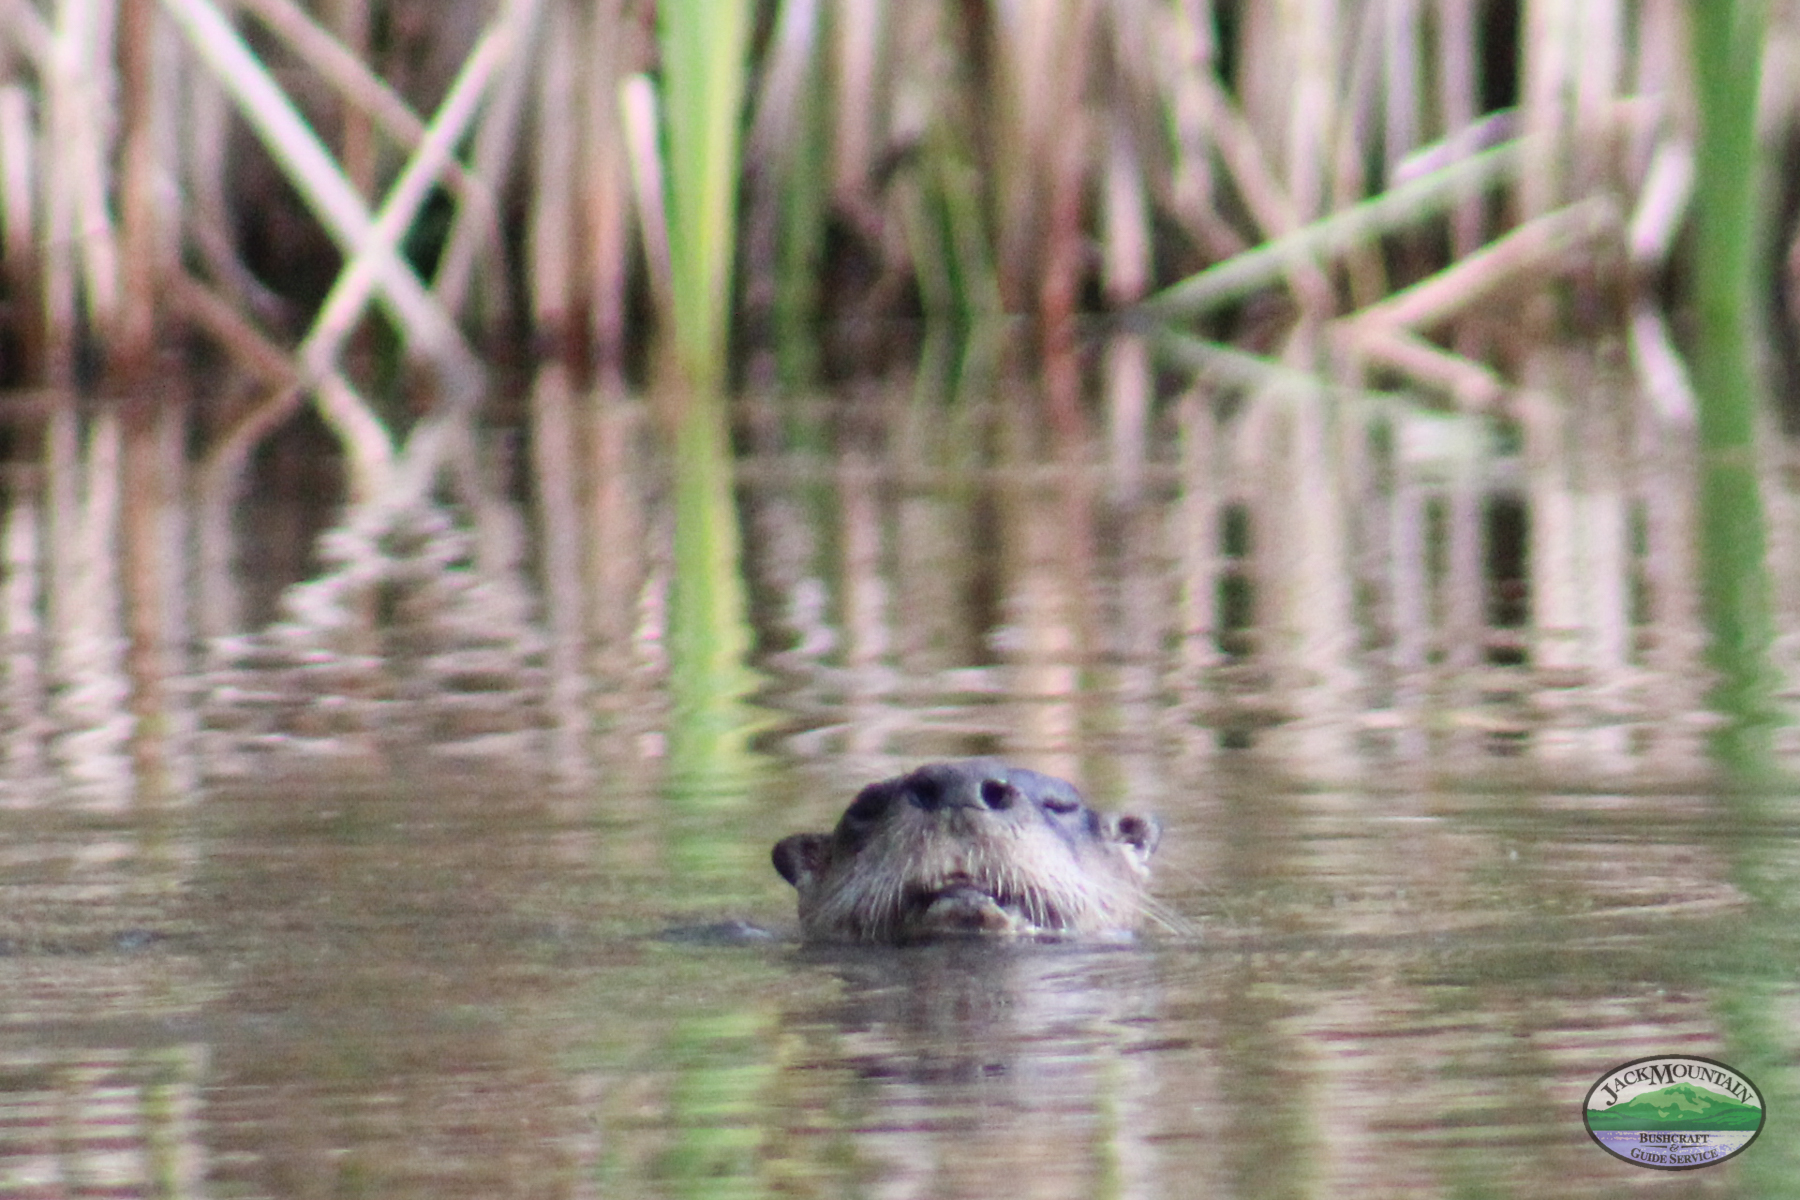 Otter in the pond